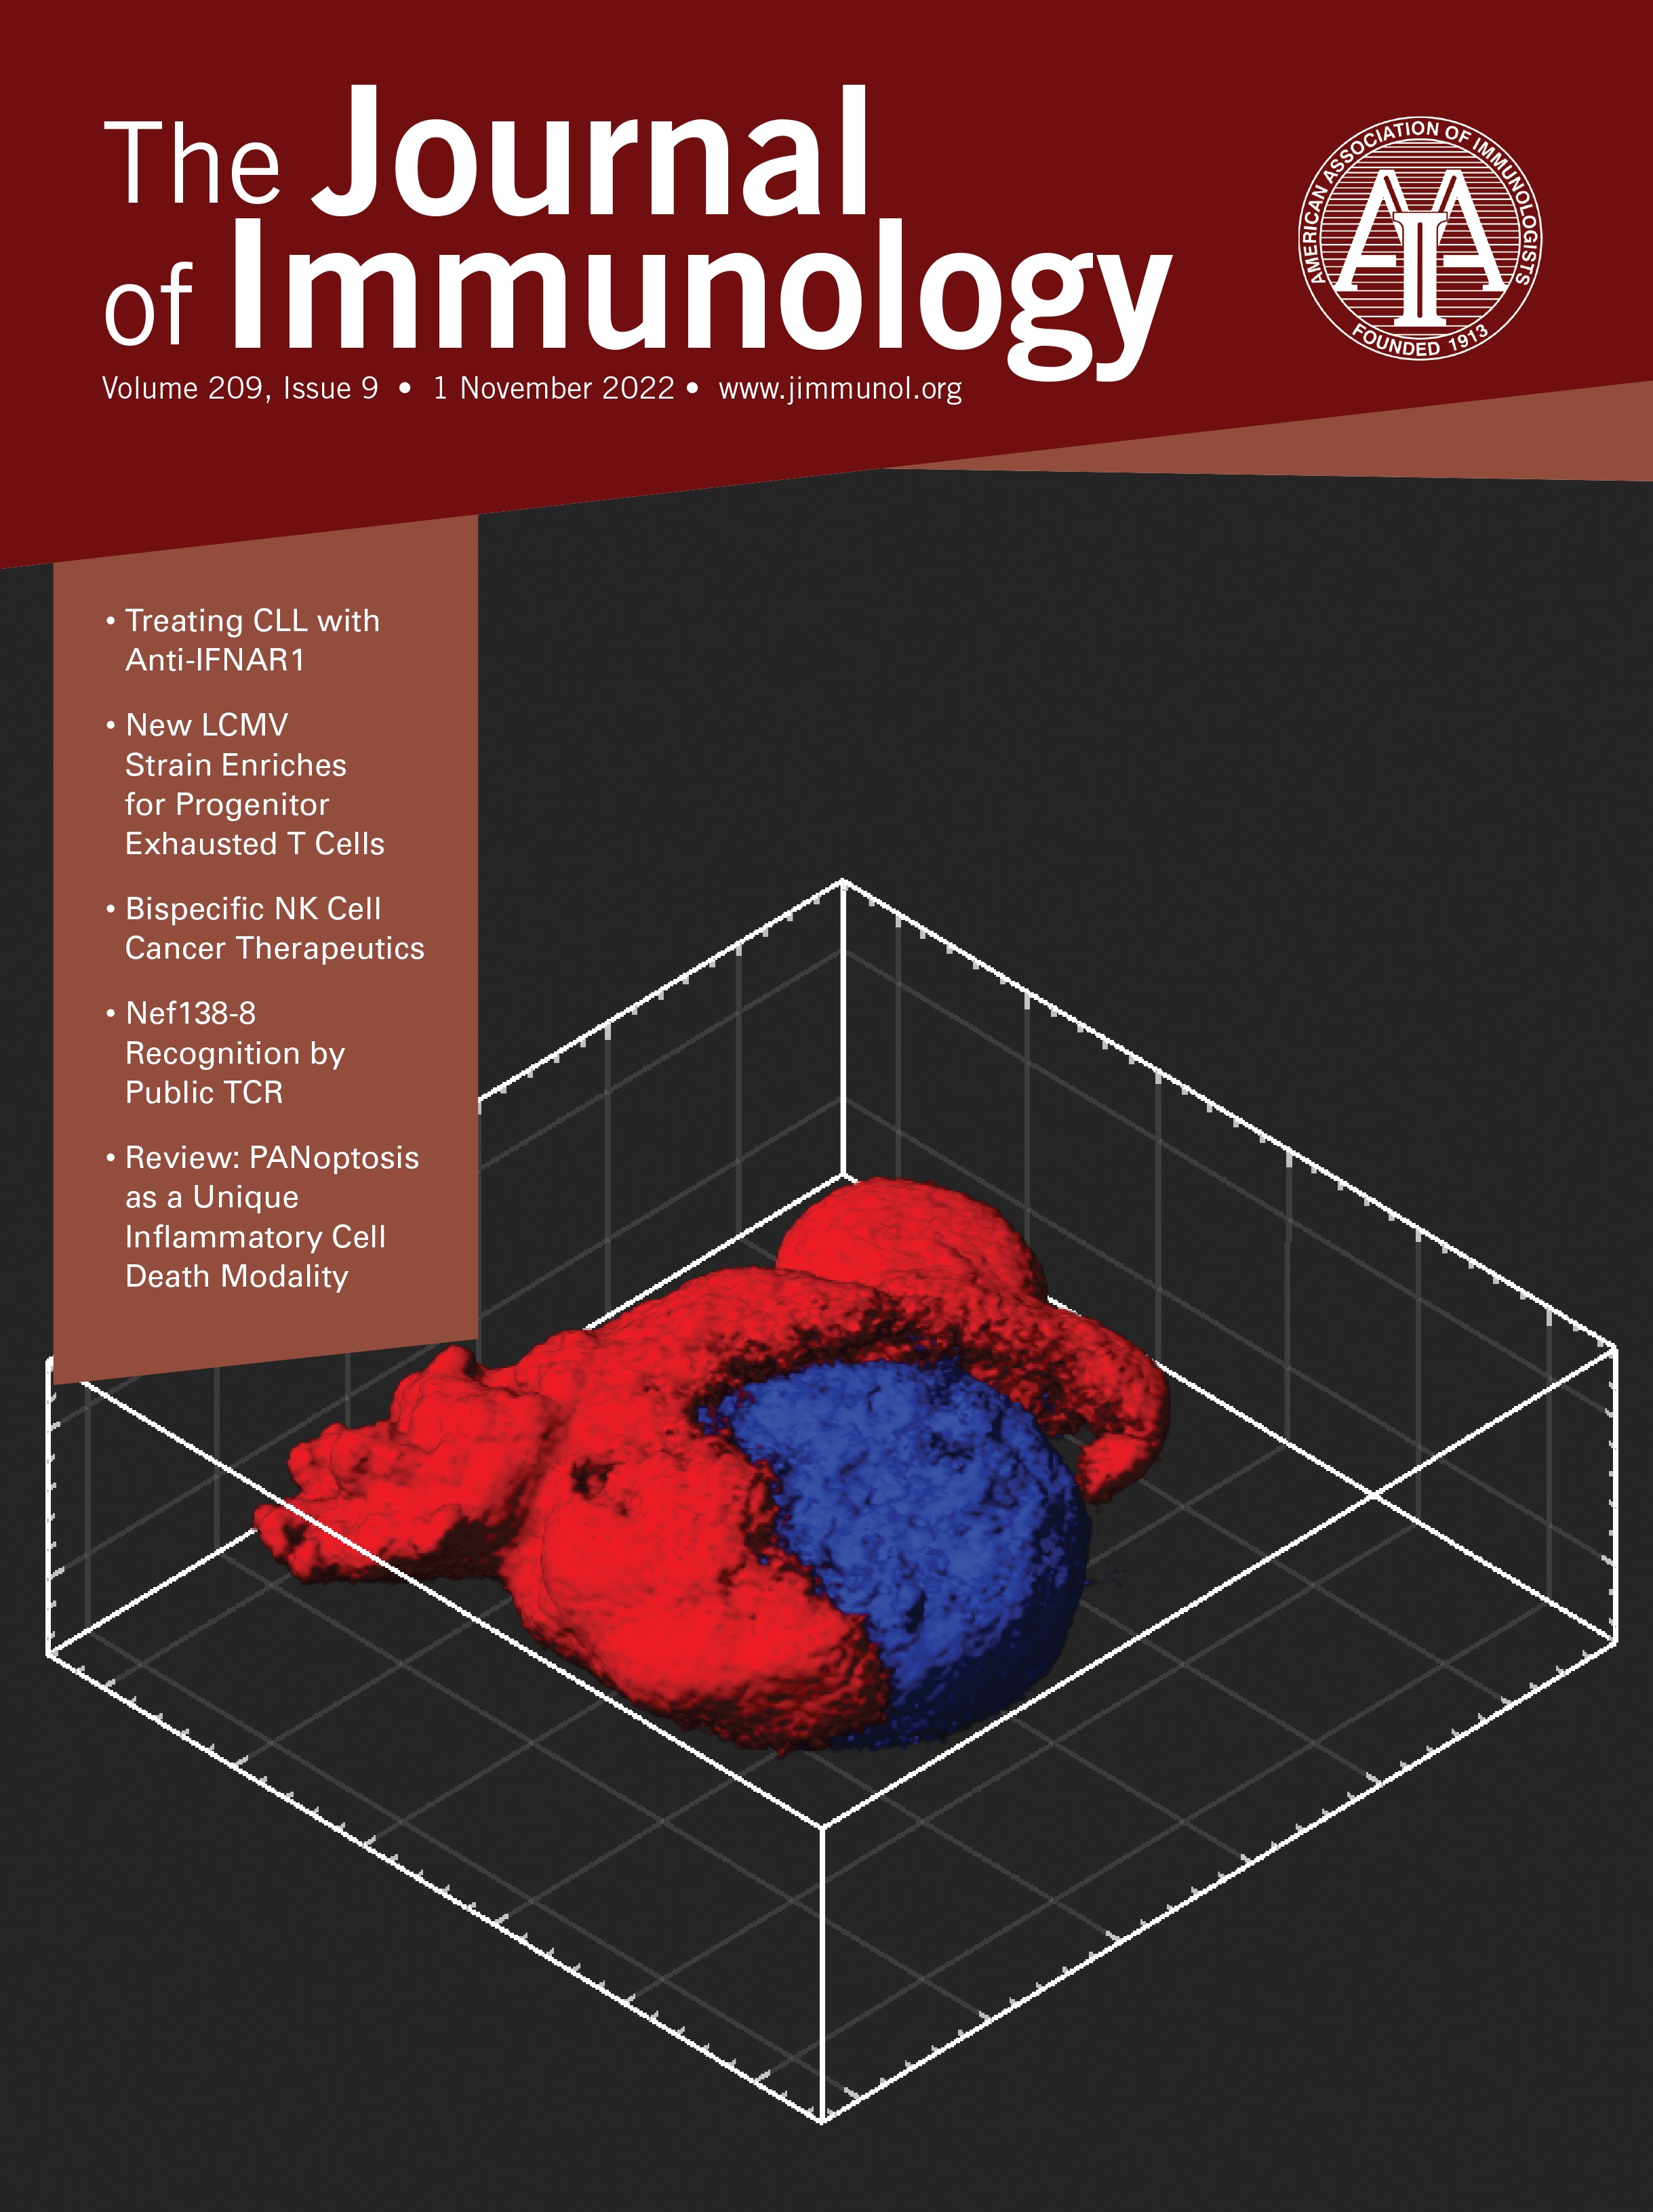 Polarization and {beta}-Glucan Reprogram Immunomodulatory Metabolism in Human Macrophages and Ex Vivo in Human Lung Cancer Tissues [CLINICAL AND HUMAN IMMUNOLOGY]